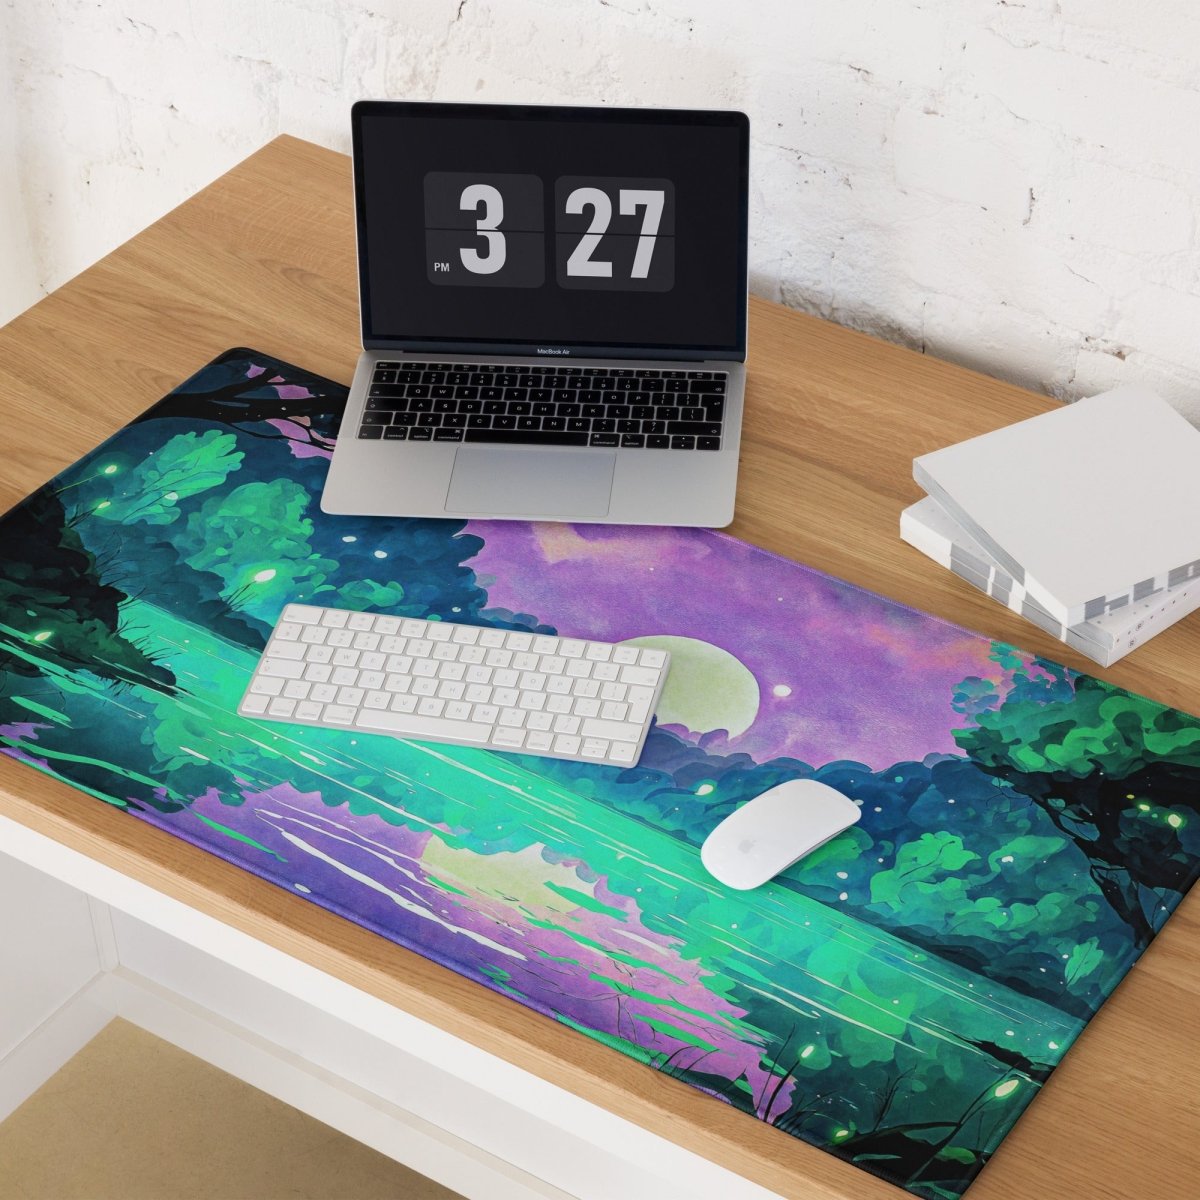 Twilight grove - Gaming mouse pad - Ever colorful